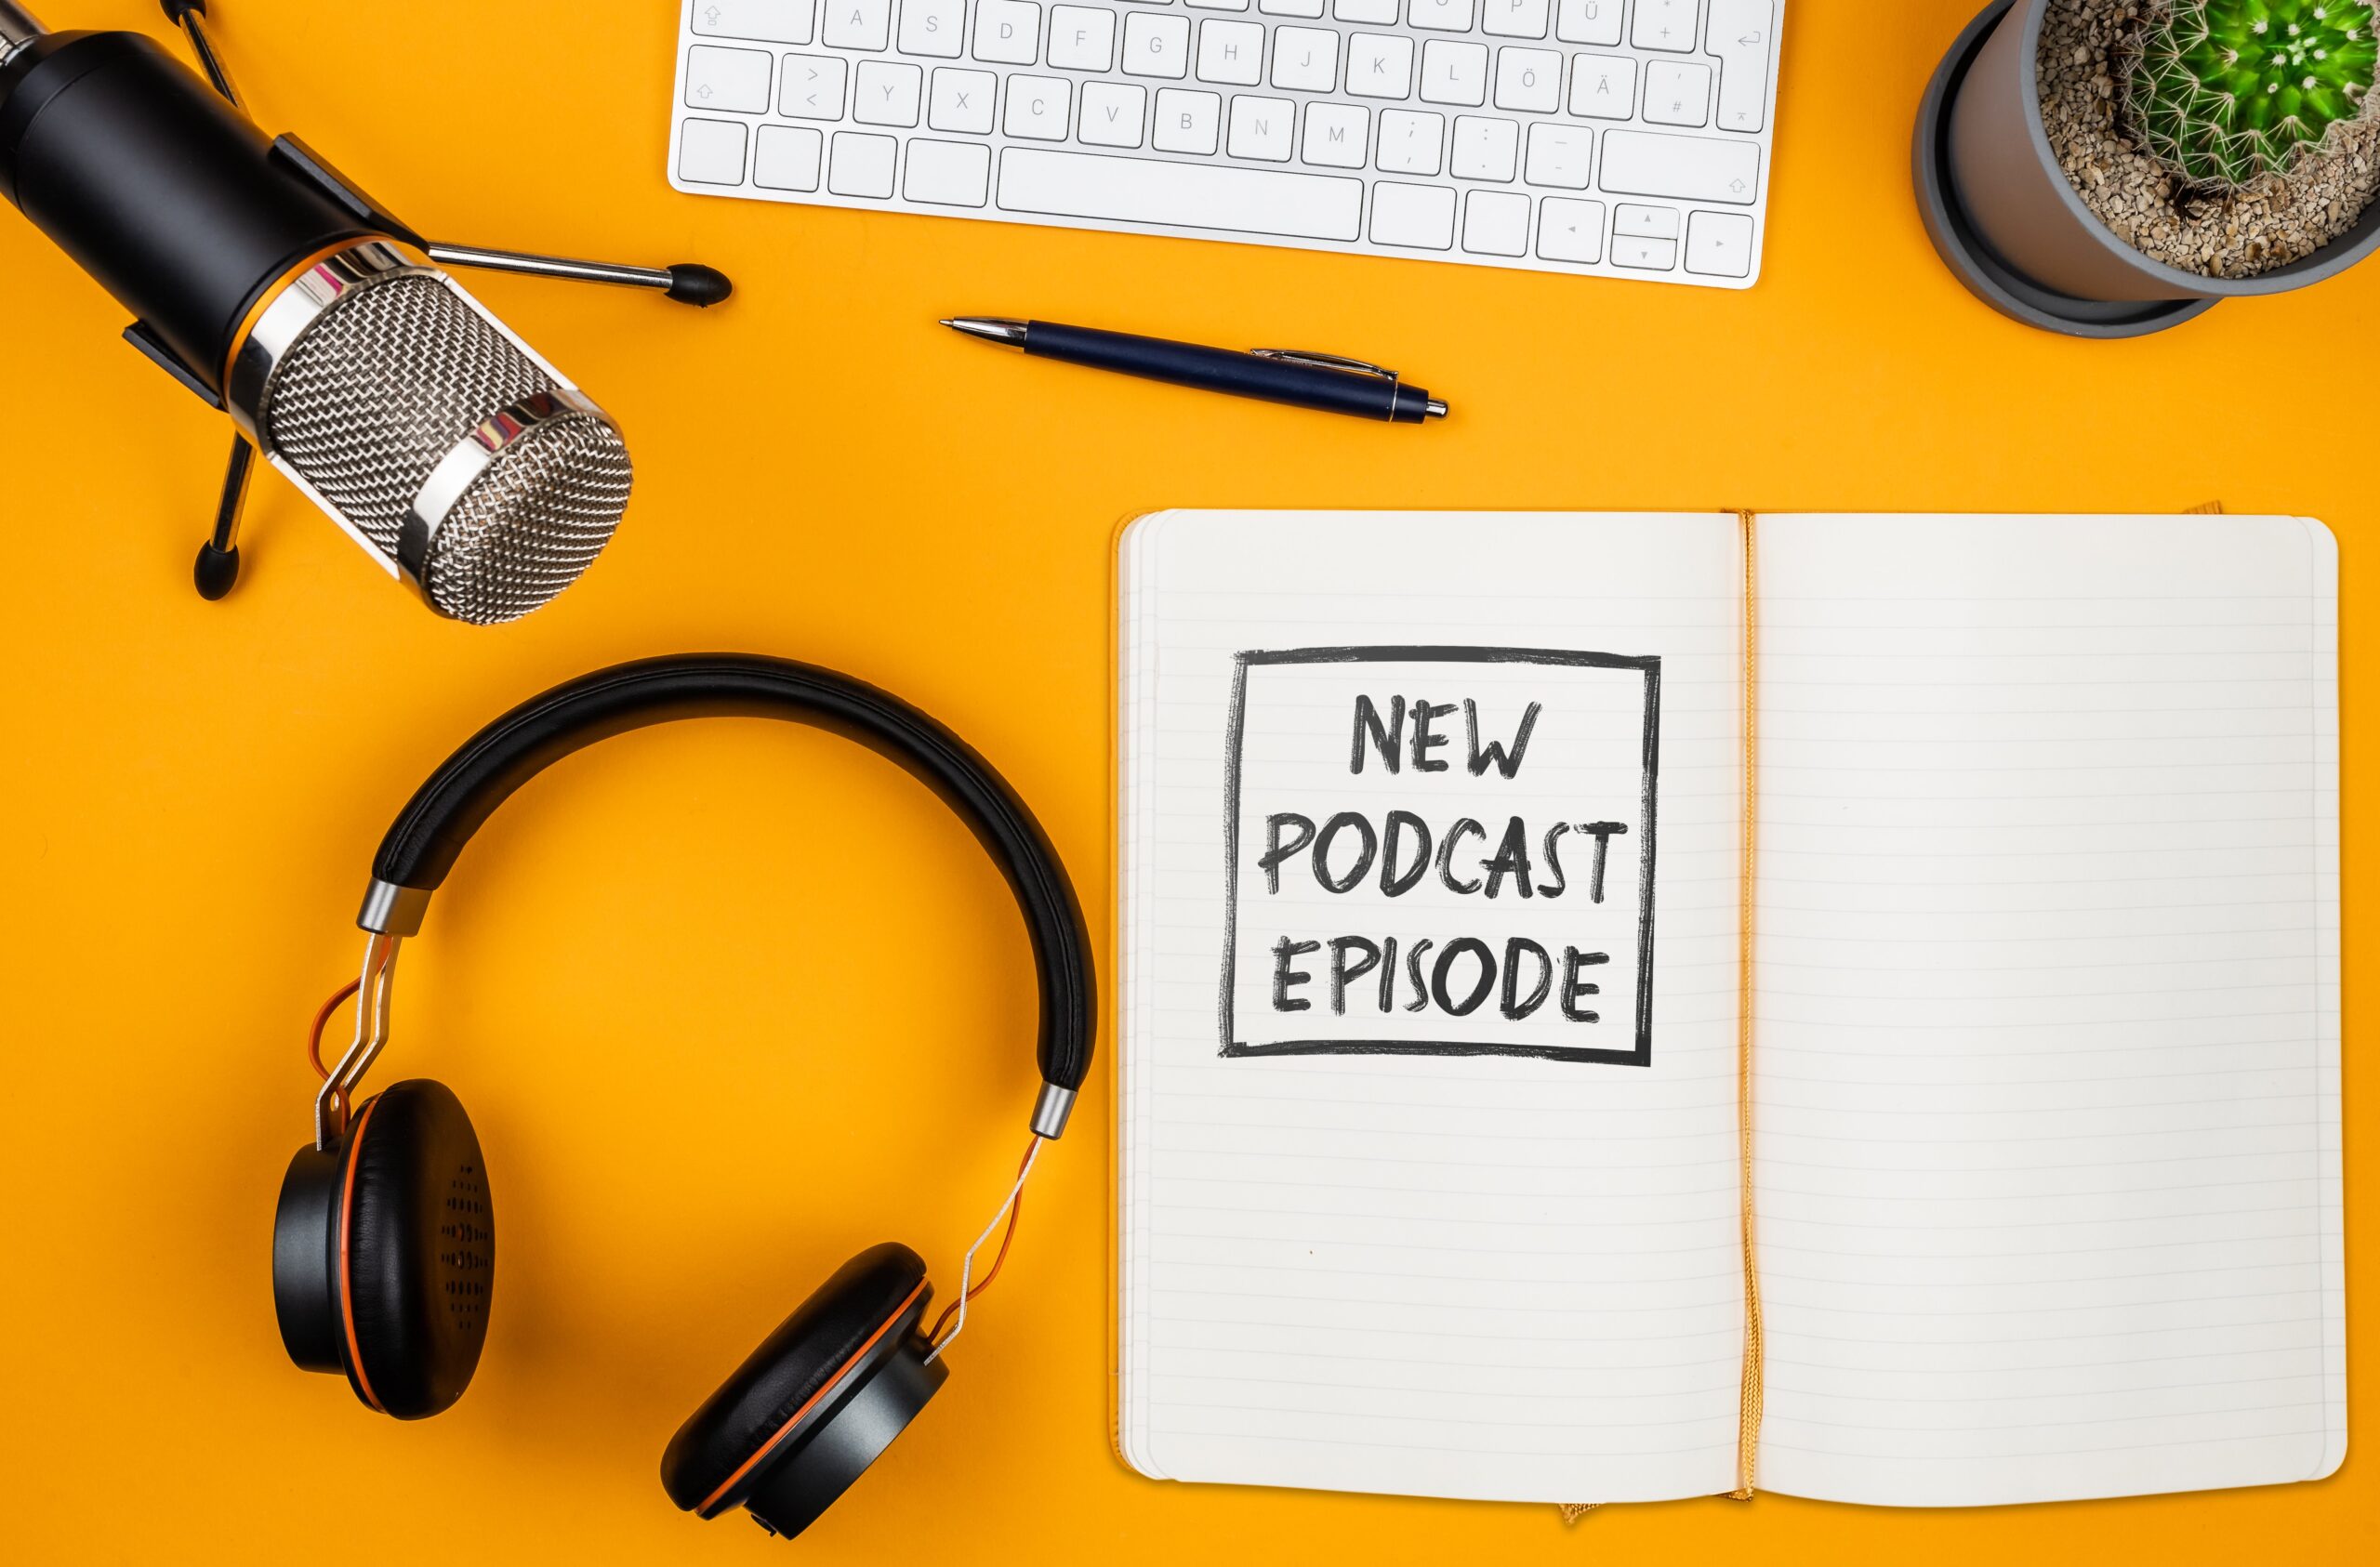 Branded Podcasts: The Ultimate Marketing Tool for Companies